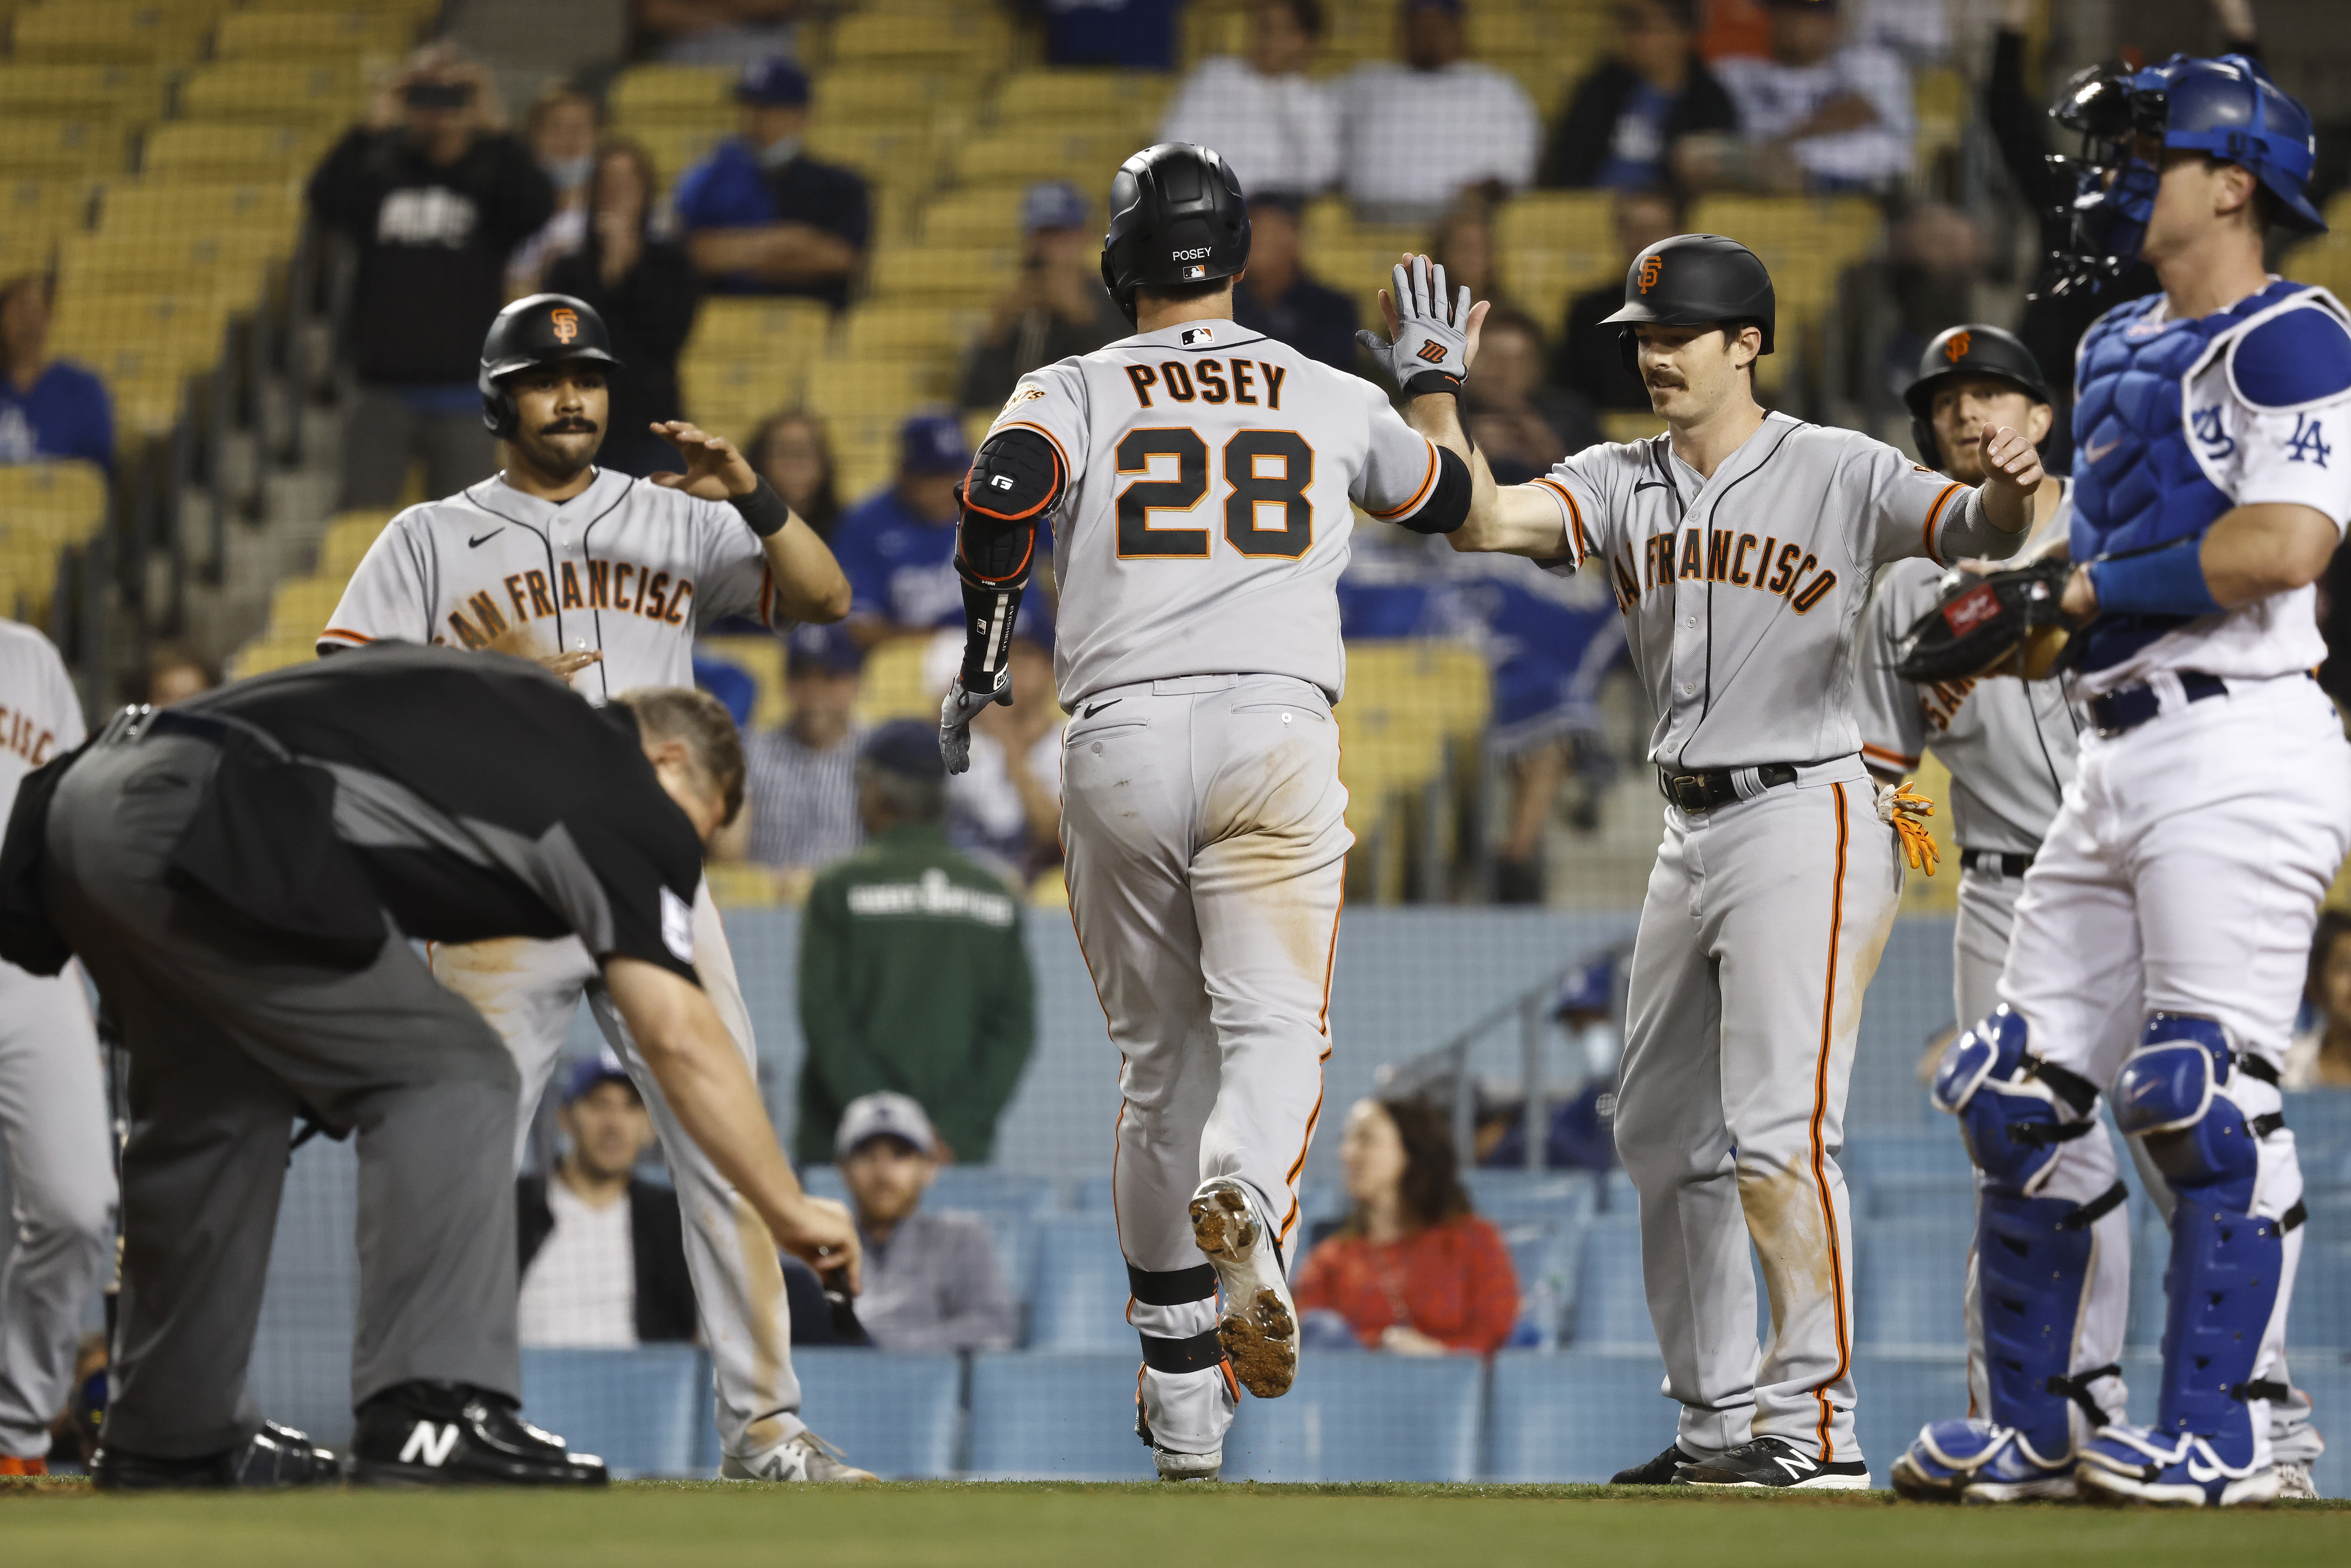 Former SF Giants outfielder robs walk-off home run in Cubs win